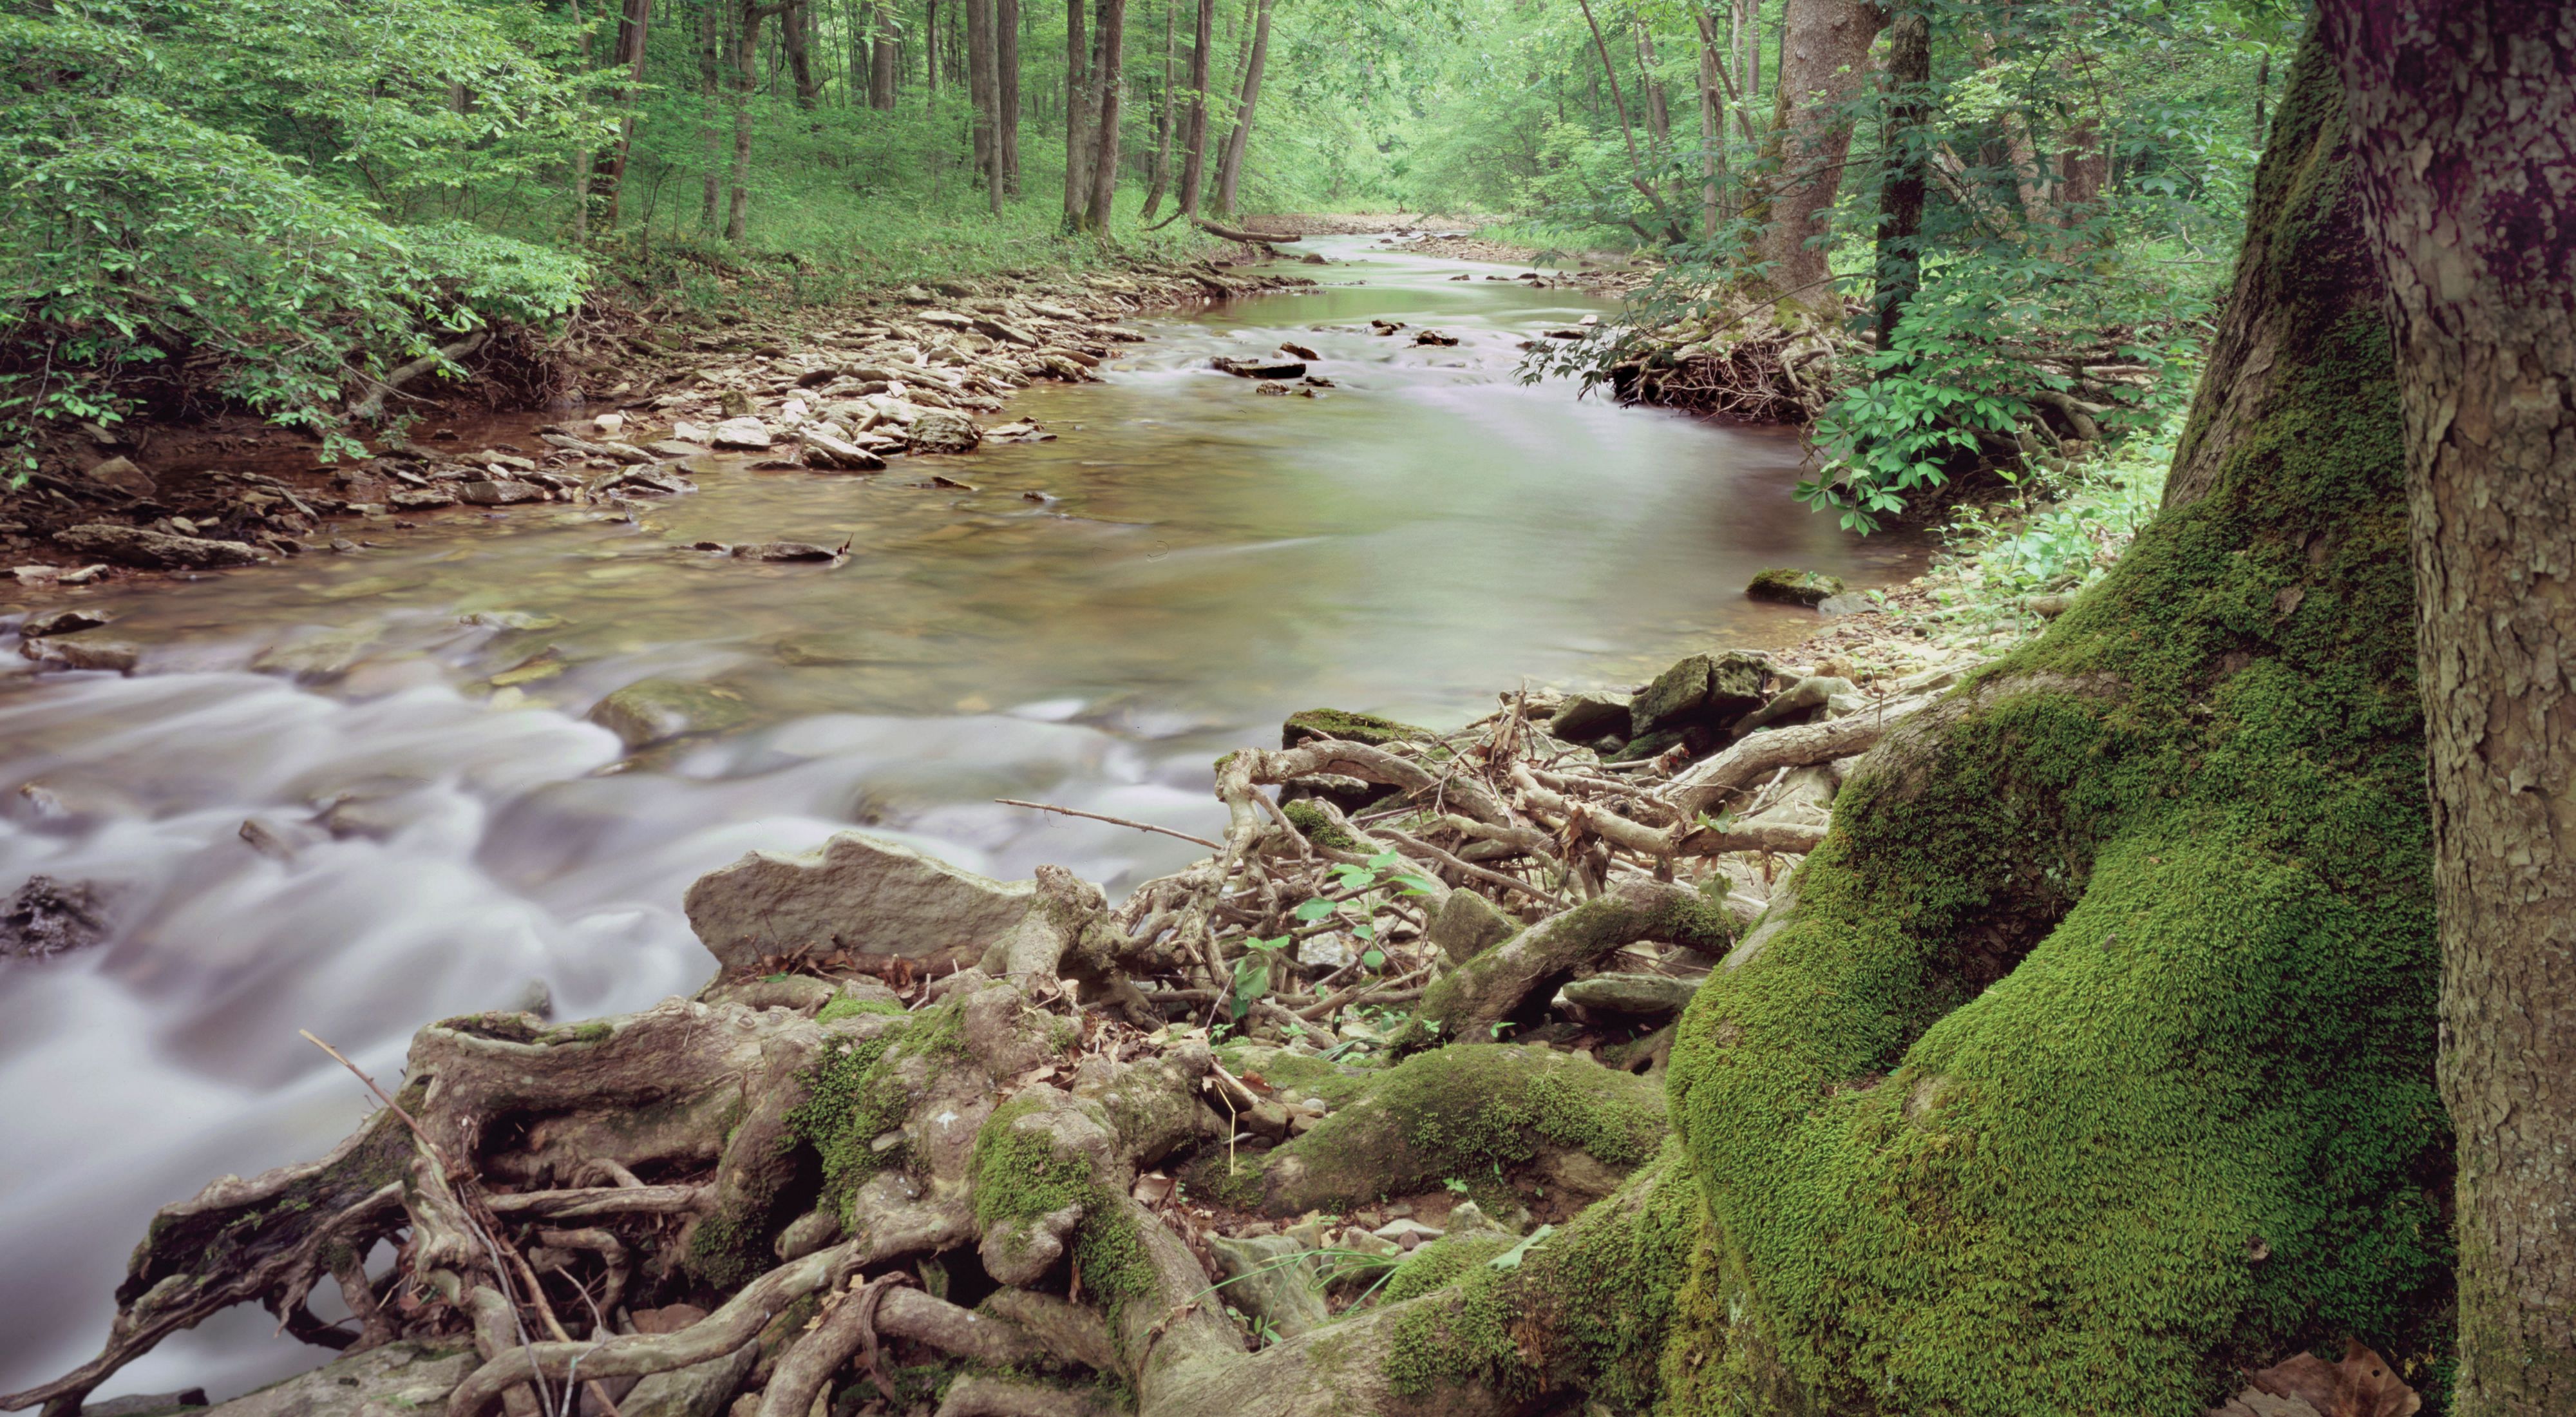 Creek running through lush forest with moss-covered tree trunks.